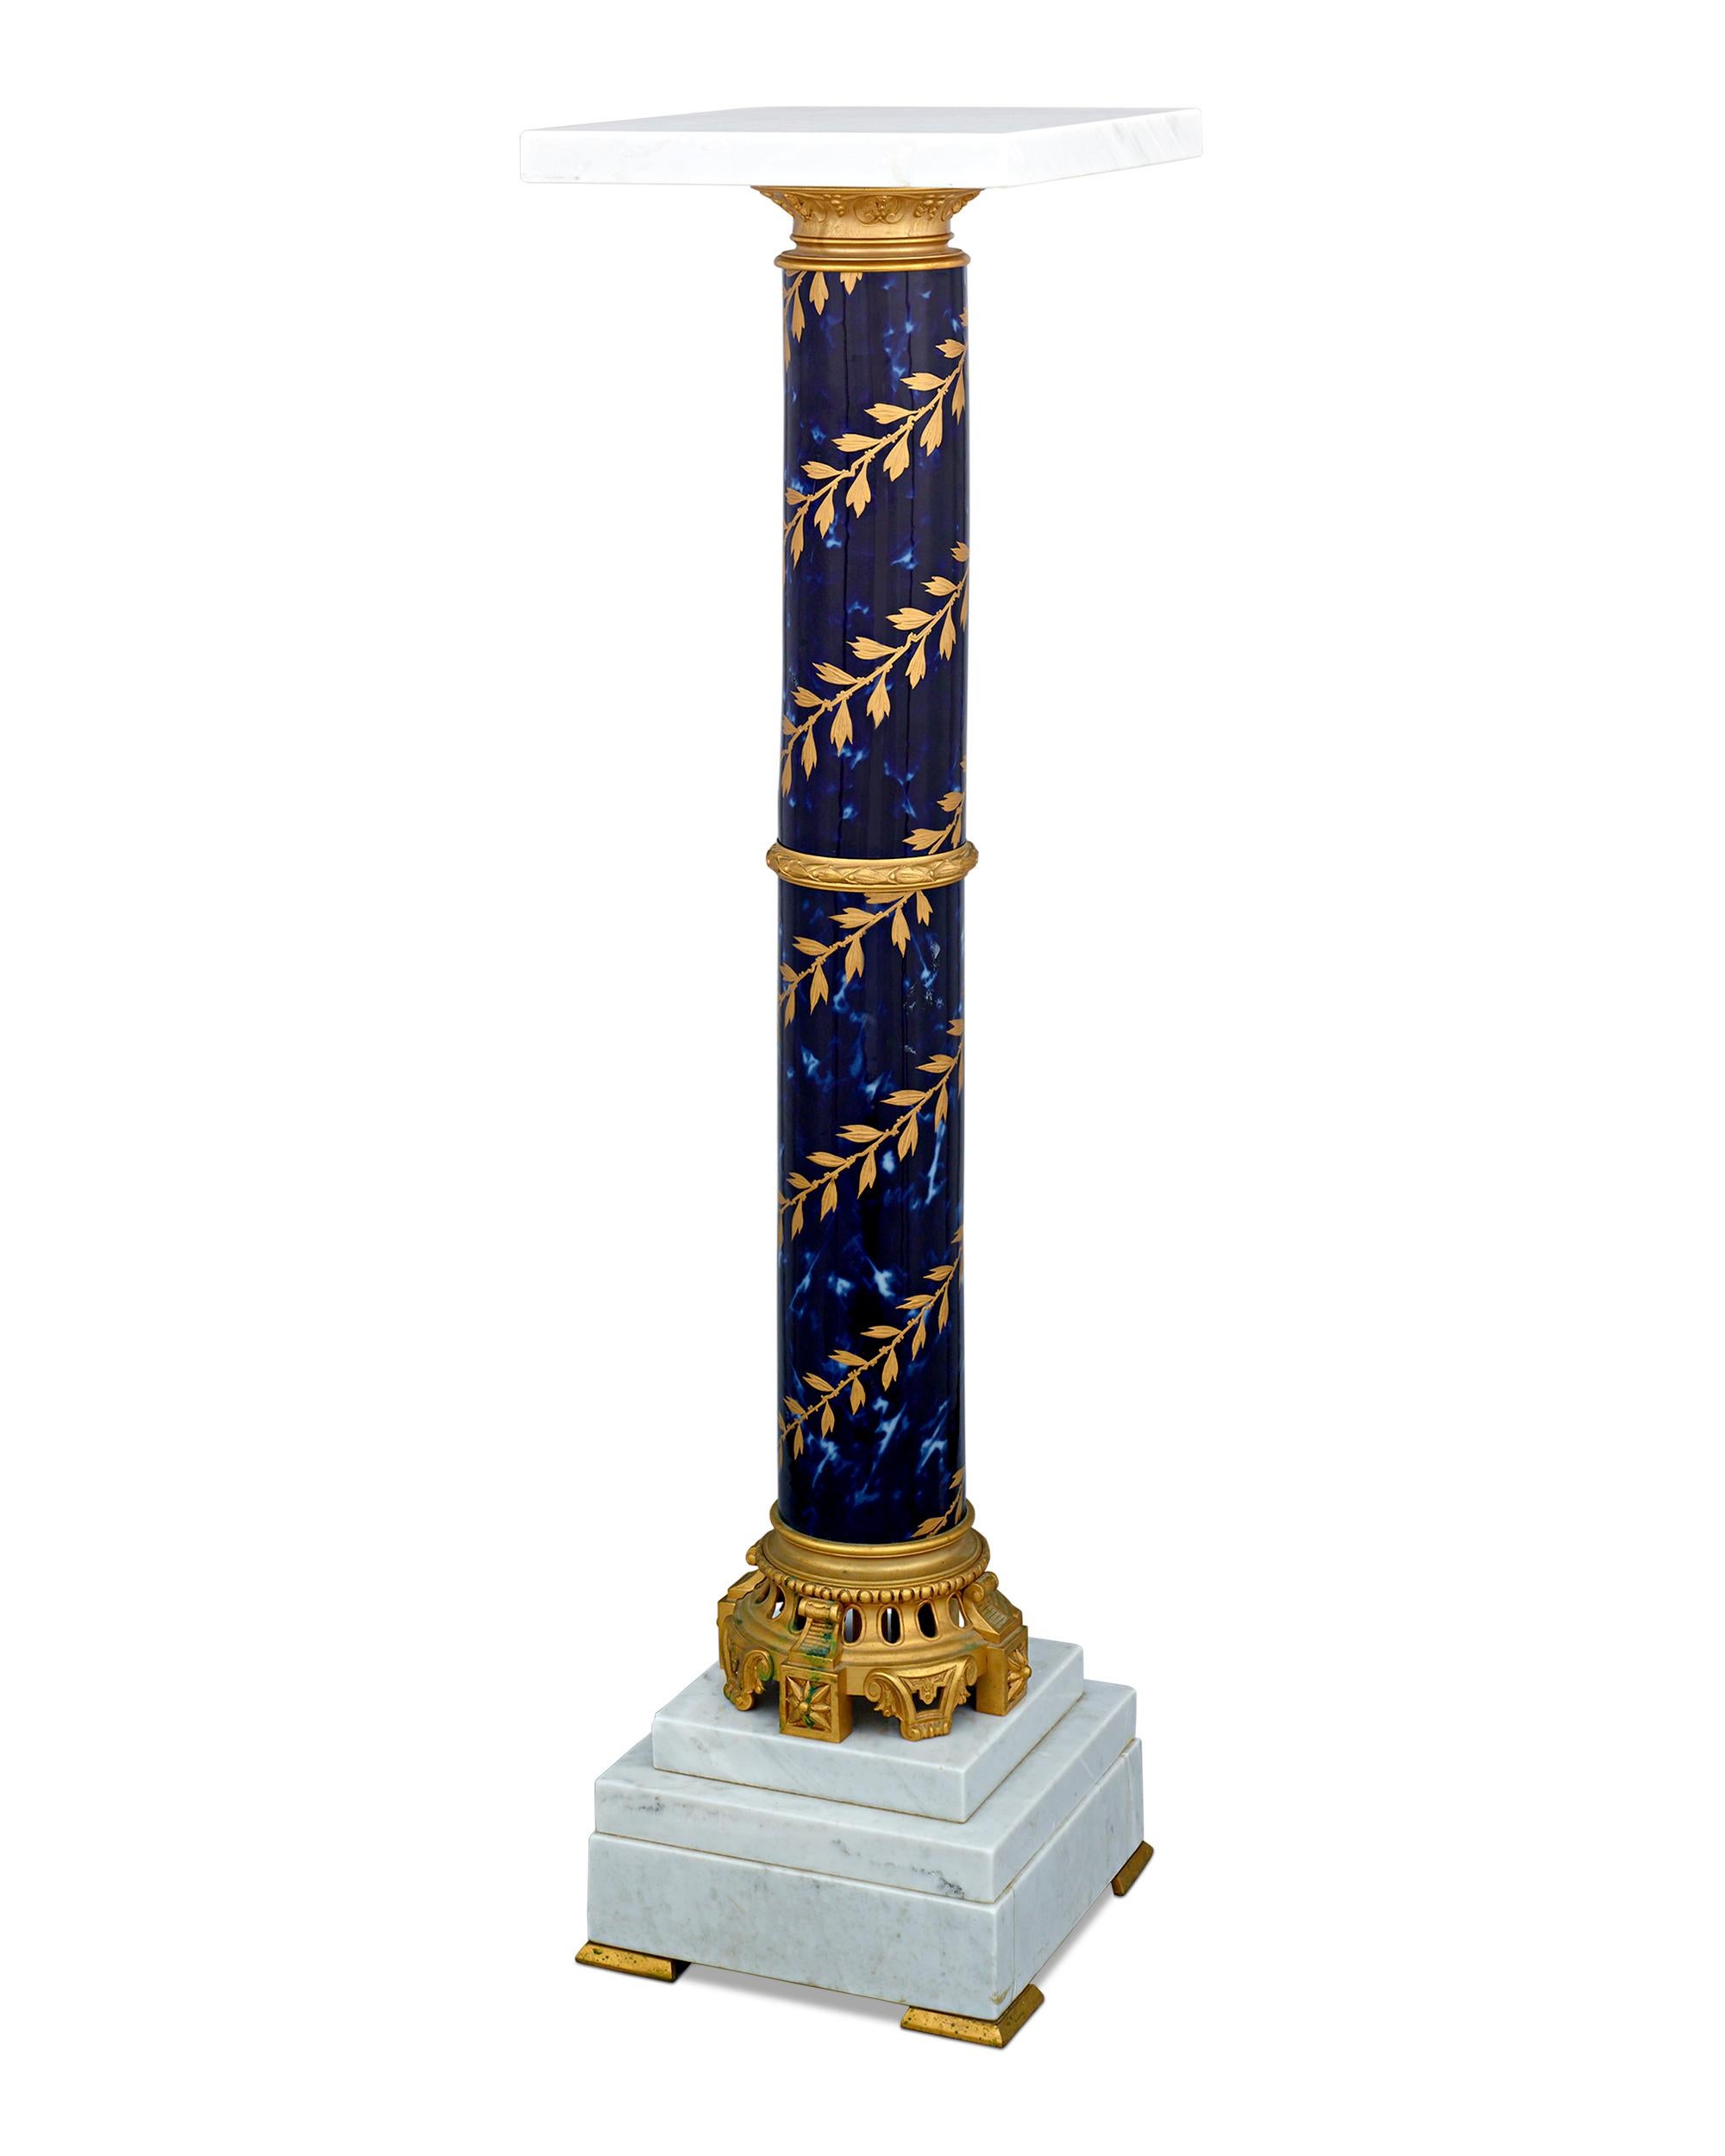 This pedestal exhibits the style and grace of the famed Sèvres porcelain manufactory. Its lustrous deep blue porcelain base is Classic Sèvres in style, and it provides the perfect background for the intricate gilt neoclassical motif that encircles